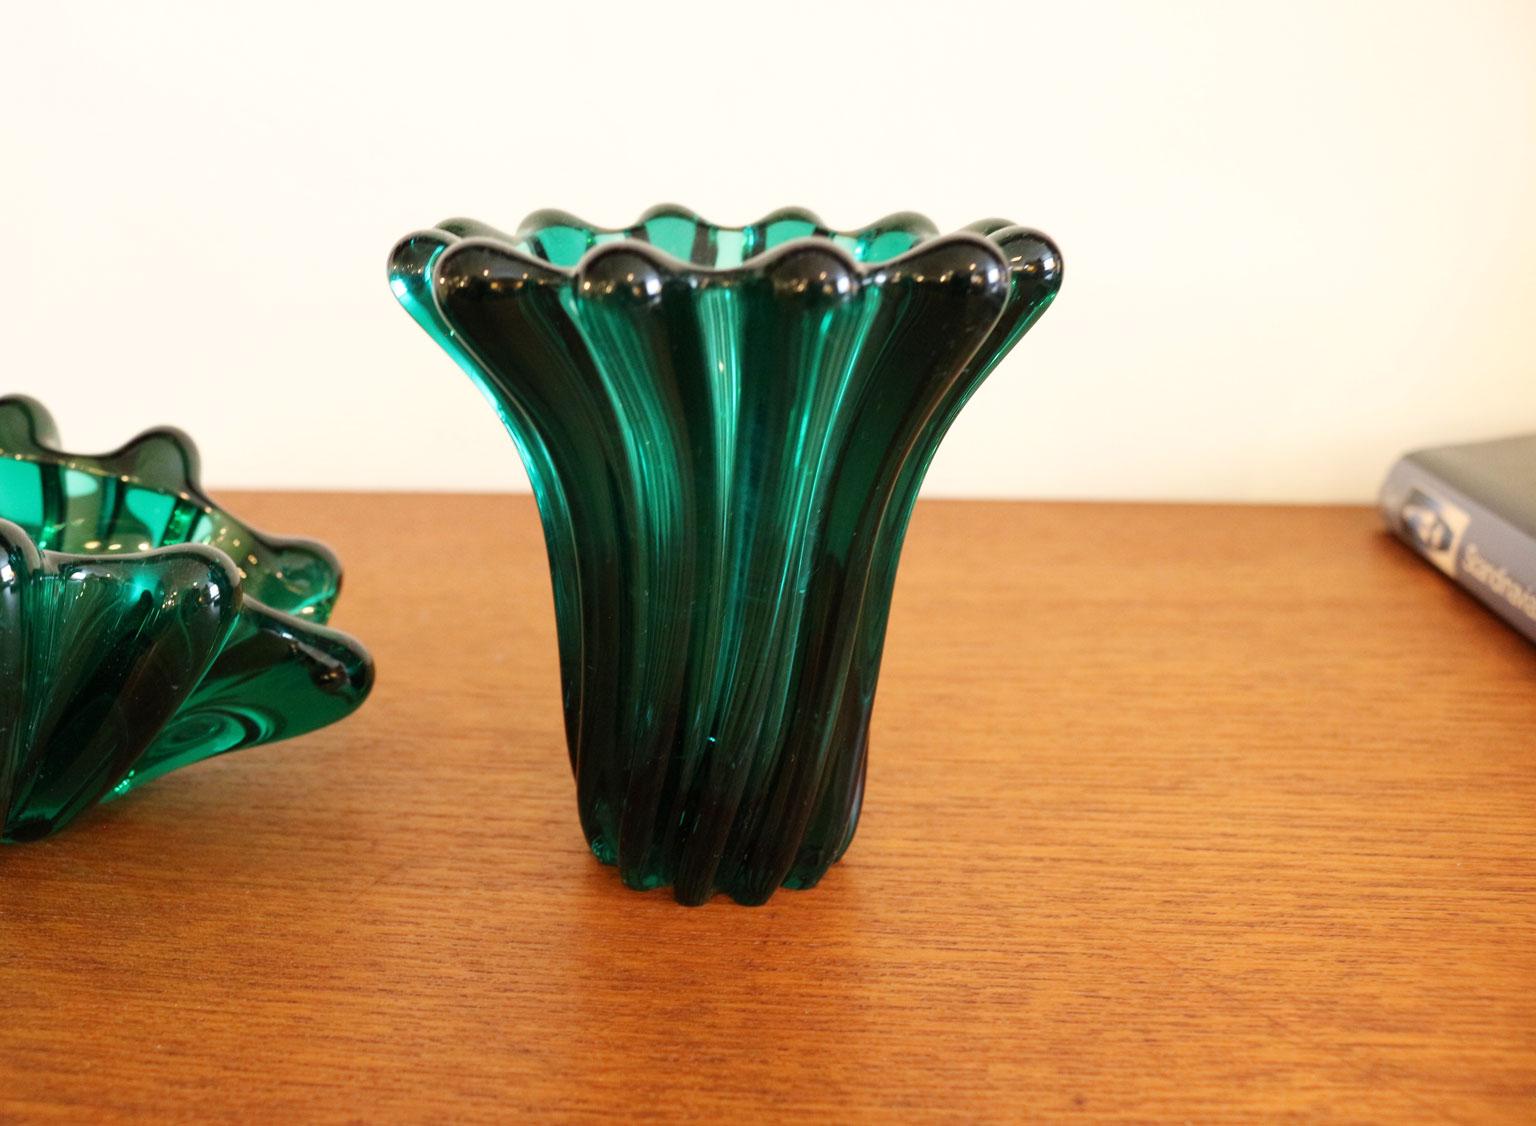 Consider this Scandinavian vase and dish set the next addition to your blossoming midcentury decorative glass collection. The modernist design of each piece has a slight organic quality thanks to the gestural form and vibrant green color.
Measures: